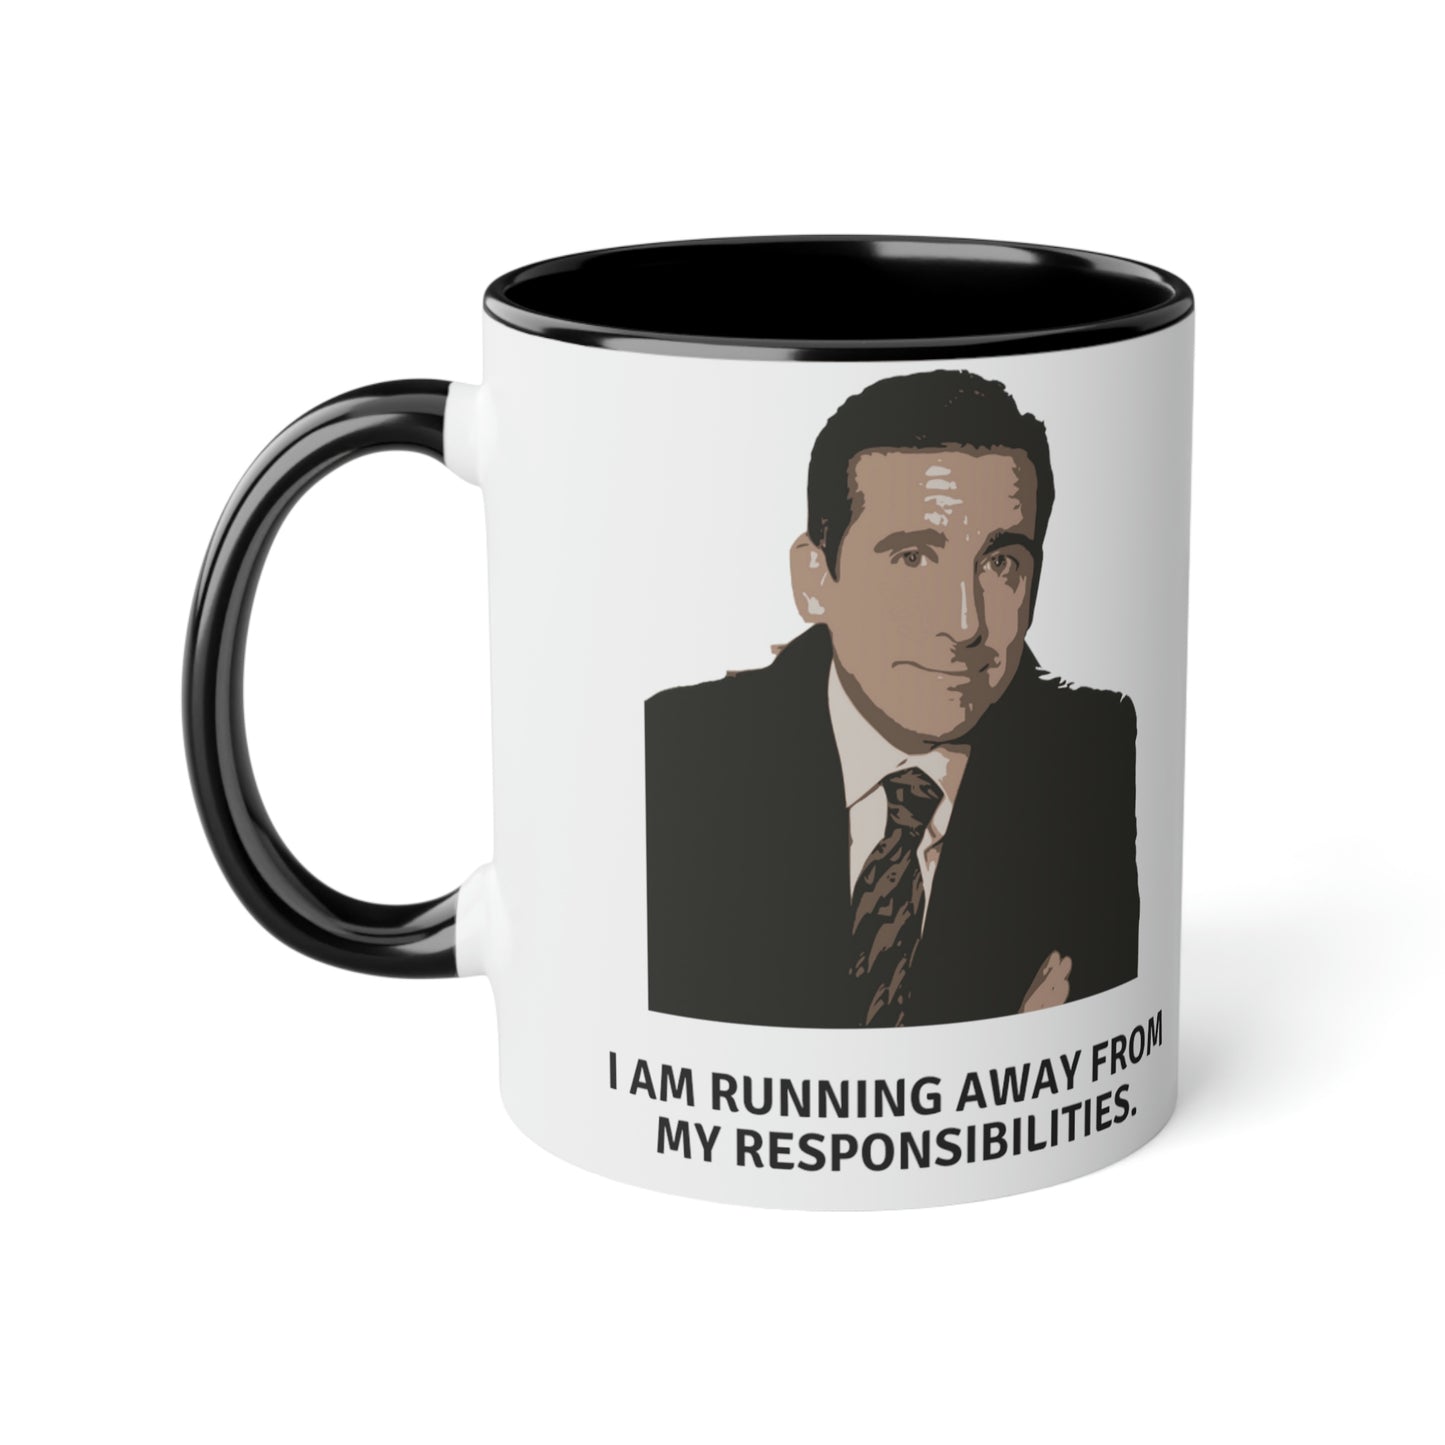 Meme Mug Dunder Mifflin workplace comedy - I am running away from my responsibilities. And it feels good